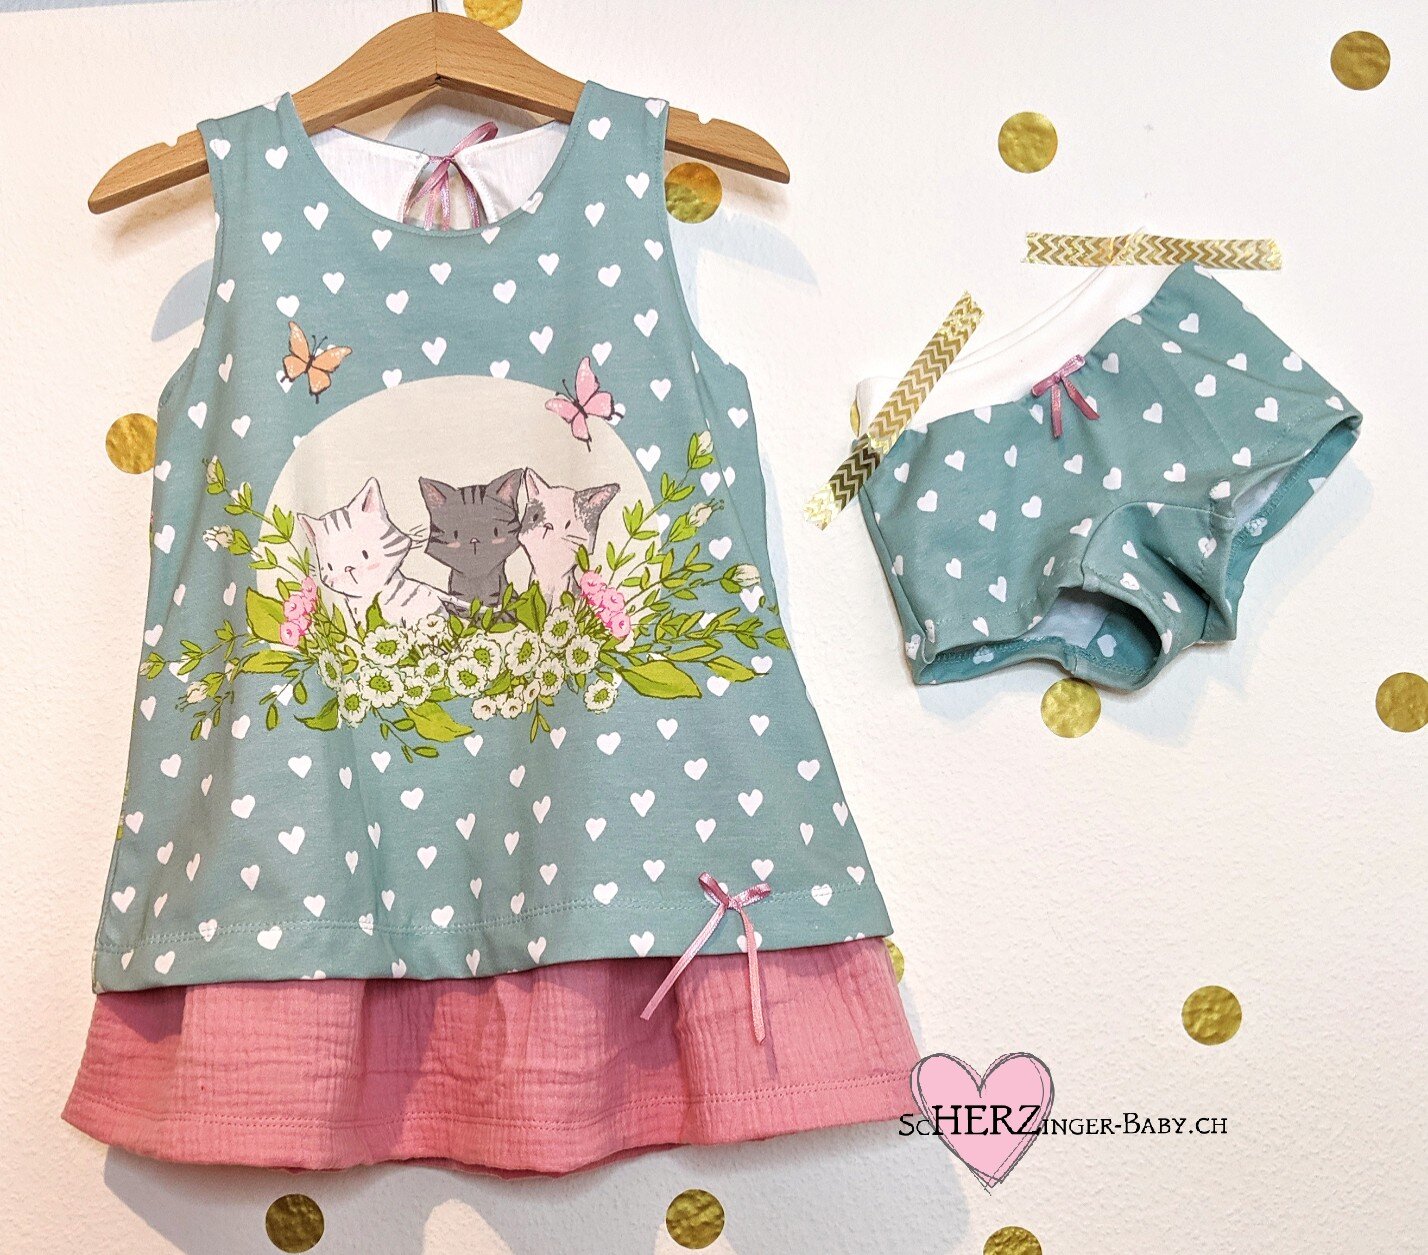 Baby clothes by heart